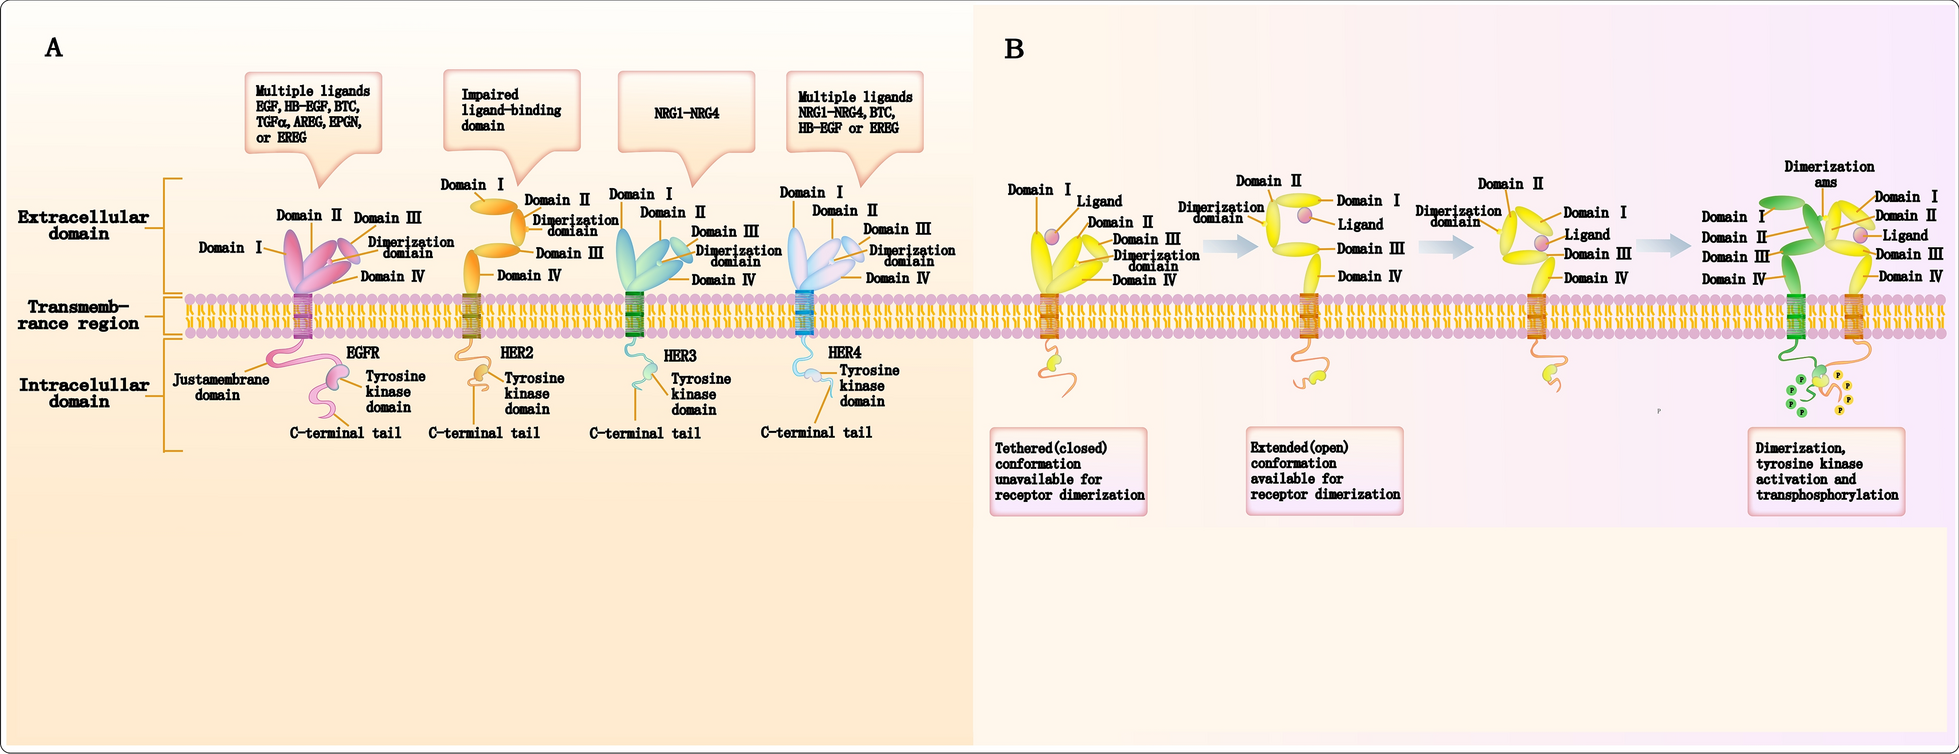 HER3 receptor and its role in the therapeutic management of metastatic breast cancer